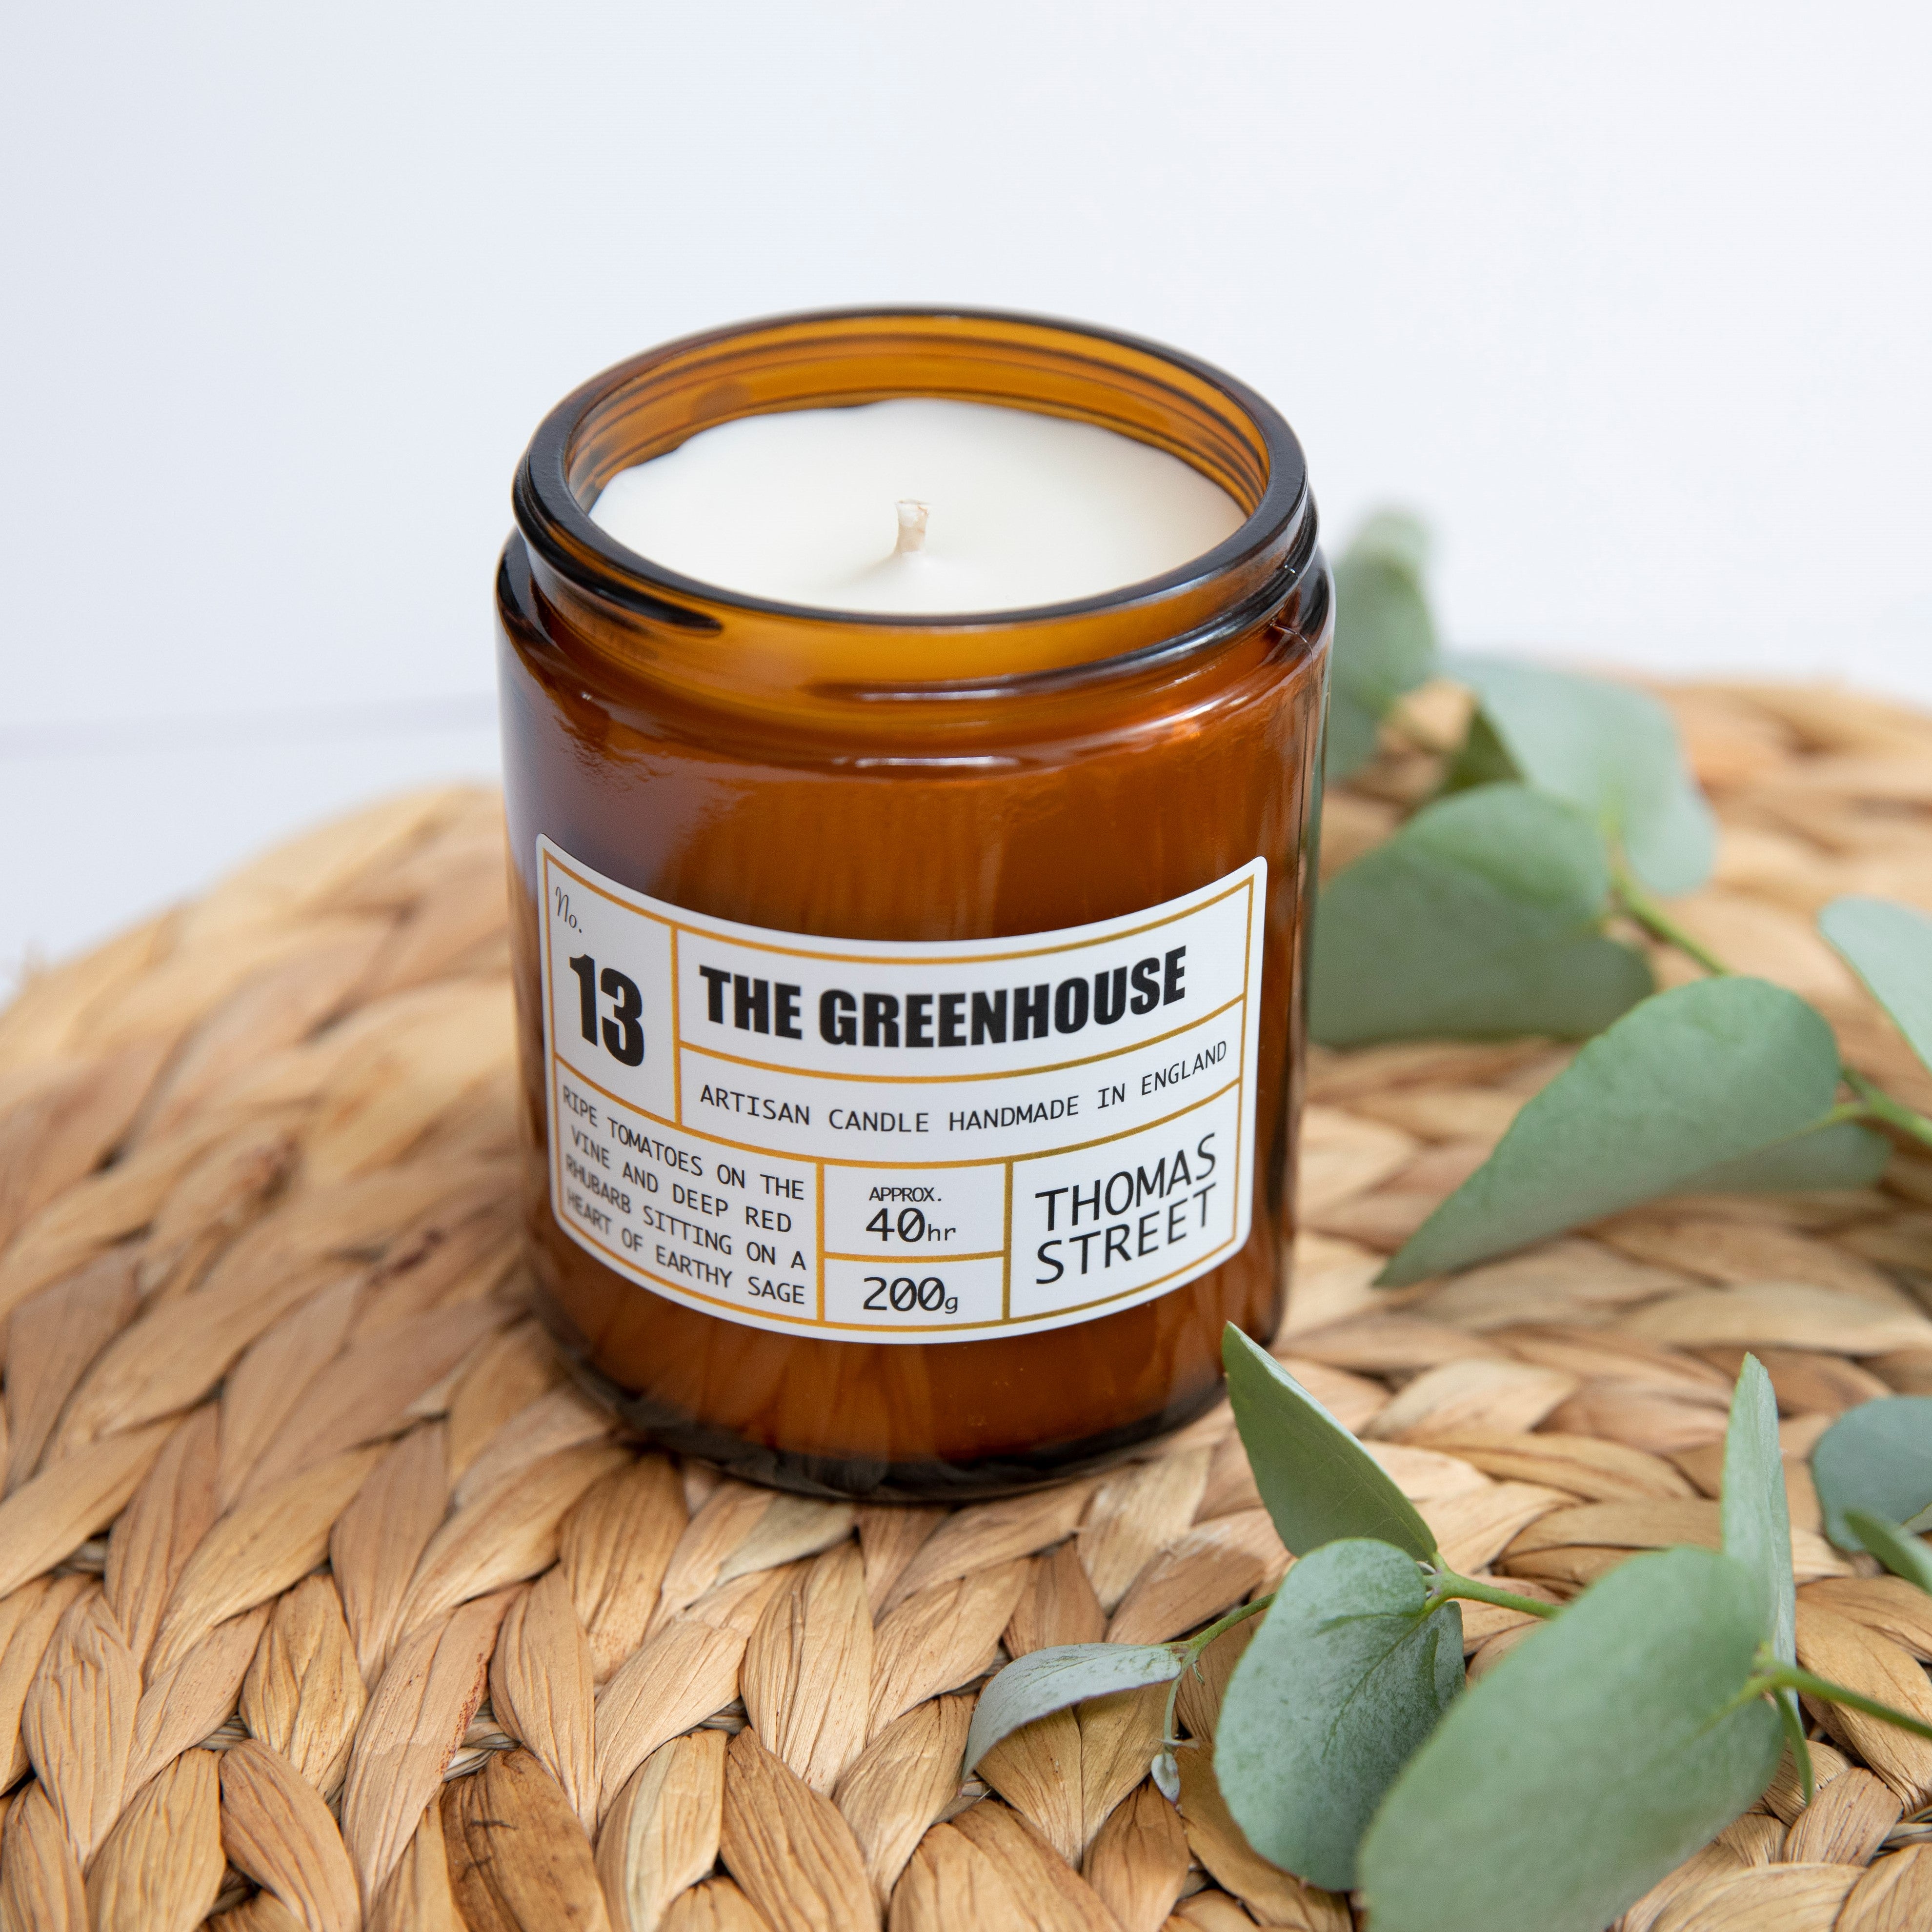 Thomas Street The Greenhouse Soy Wax Scented Candle